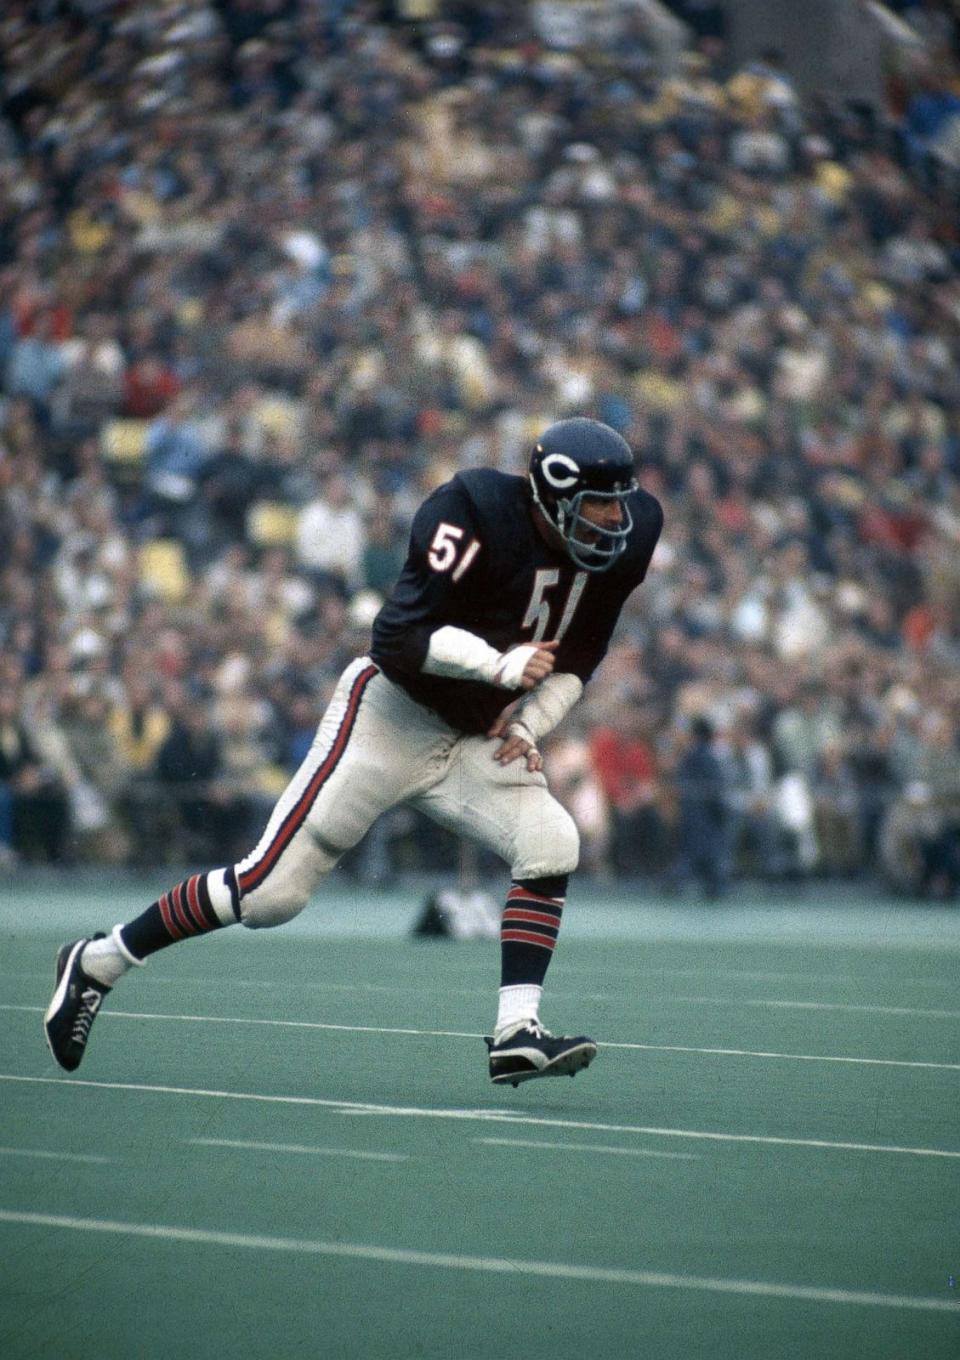 PHOTO: Dick Butkus #51 of the Chicago Bears at middle linebacker in a circa early 1970's NFL football game at Soldier field in Chicago. (Focus On Sport/Getty Images)